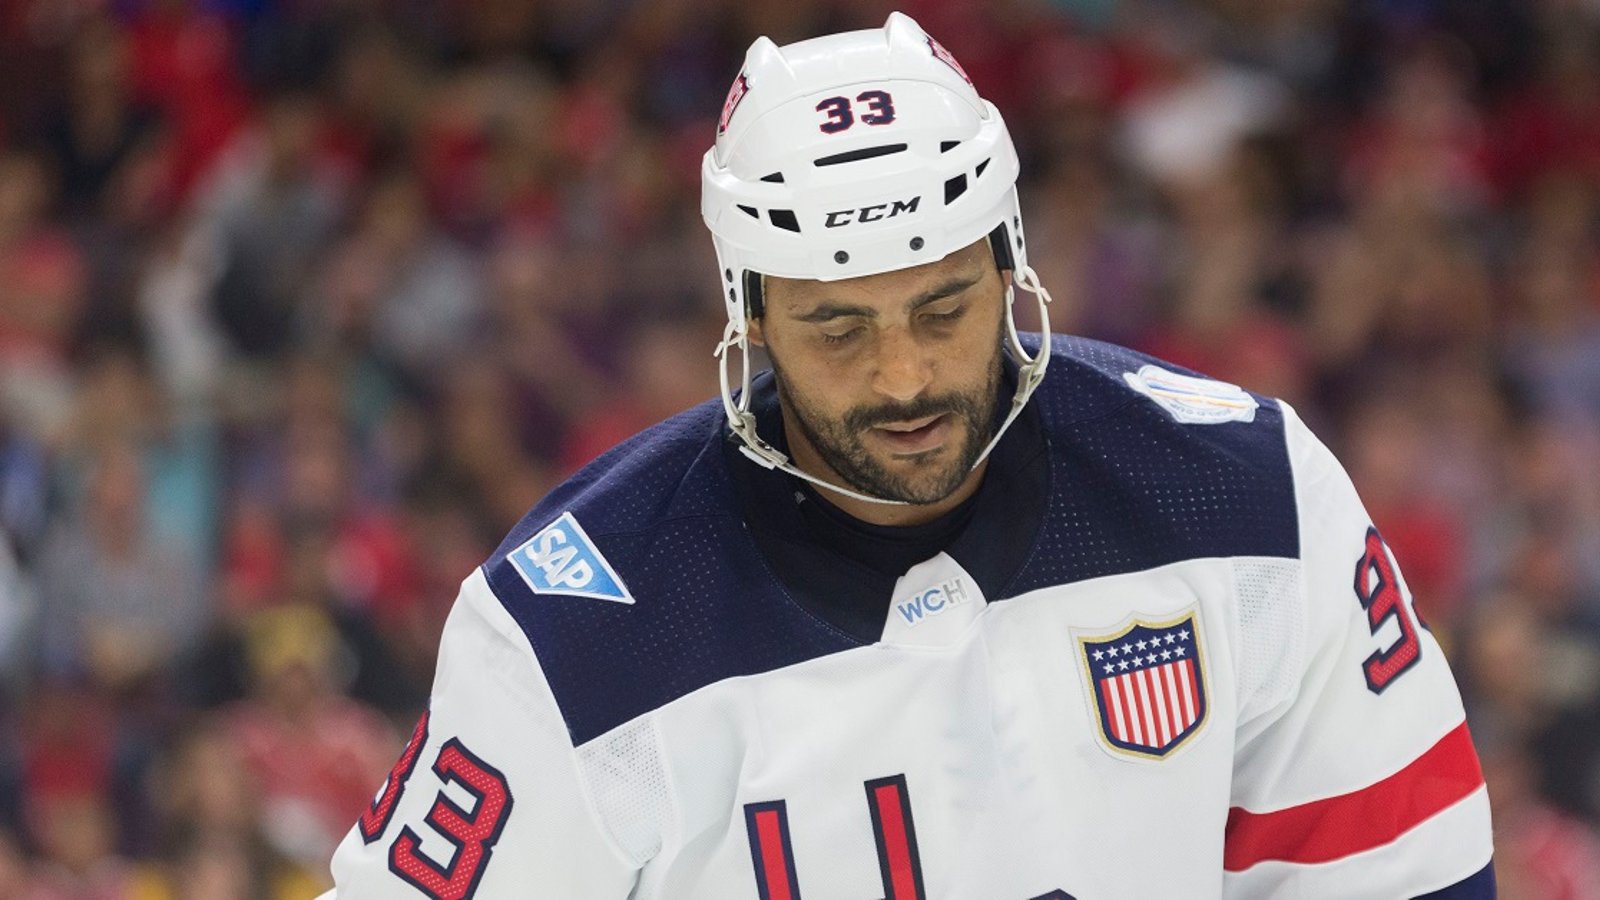 Dustin Byfuglien not a fan of Tortorella's decision to play him at forward.